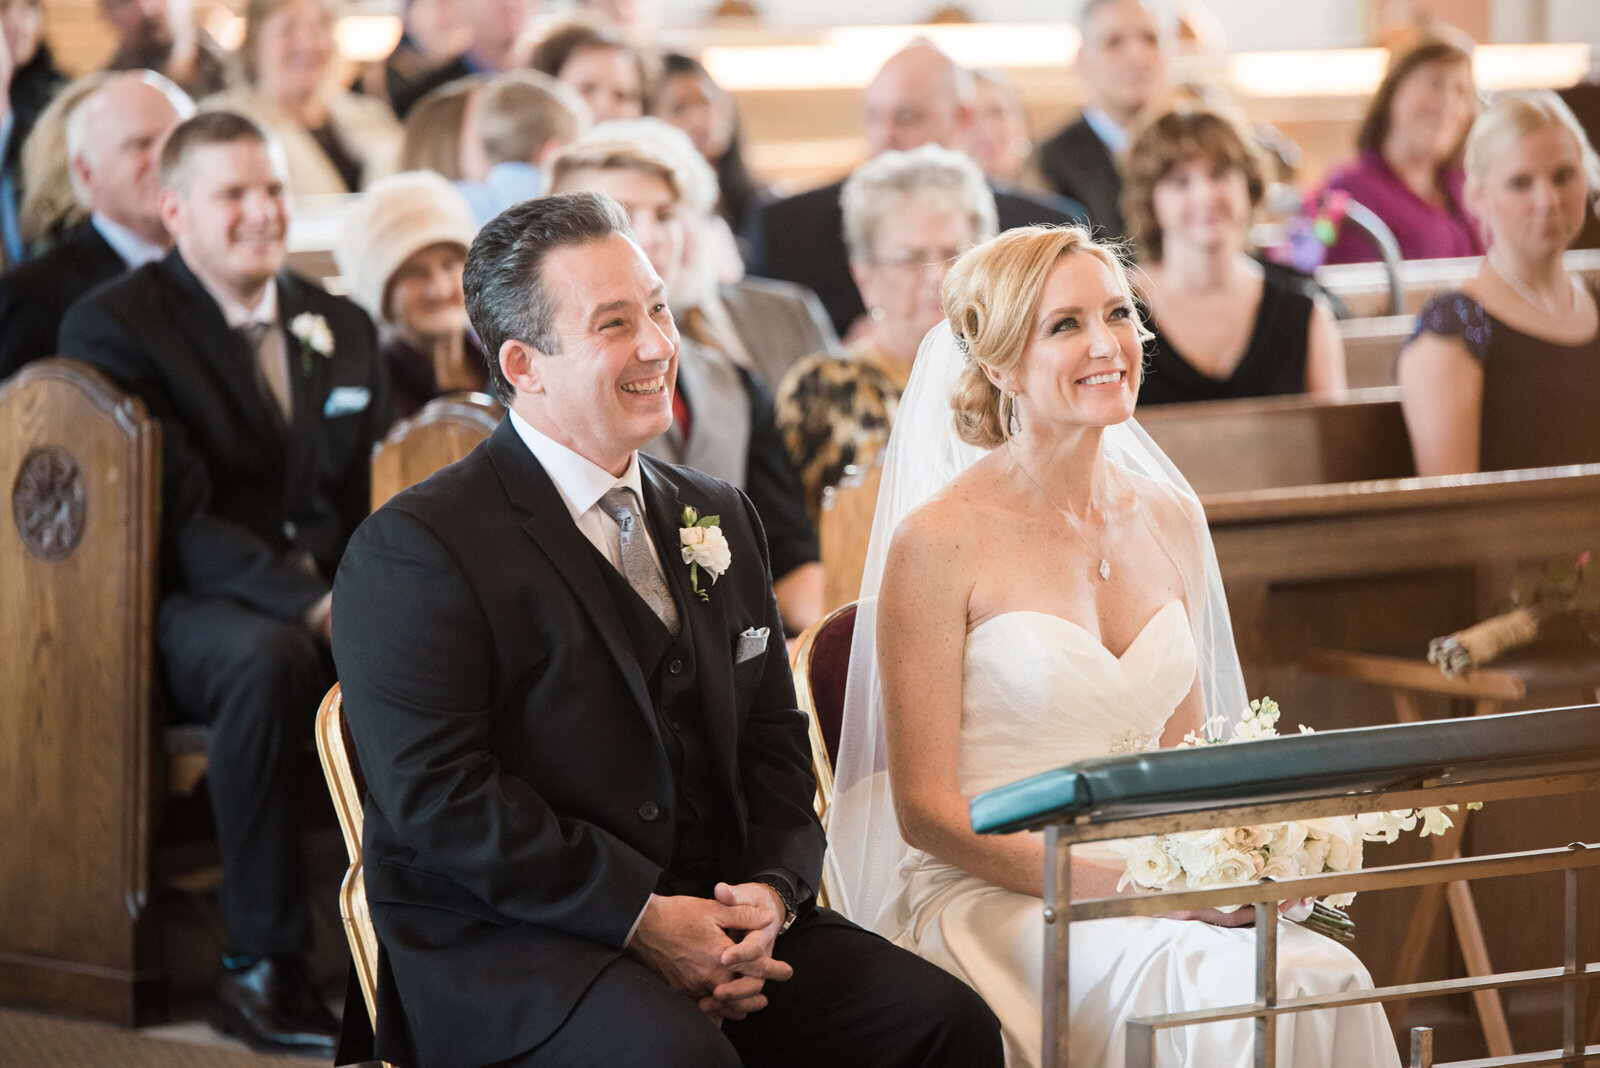 Lisa-and-Mike-wedding-at-Chicago-hotel-couple-smiling-at-ceremony